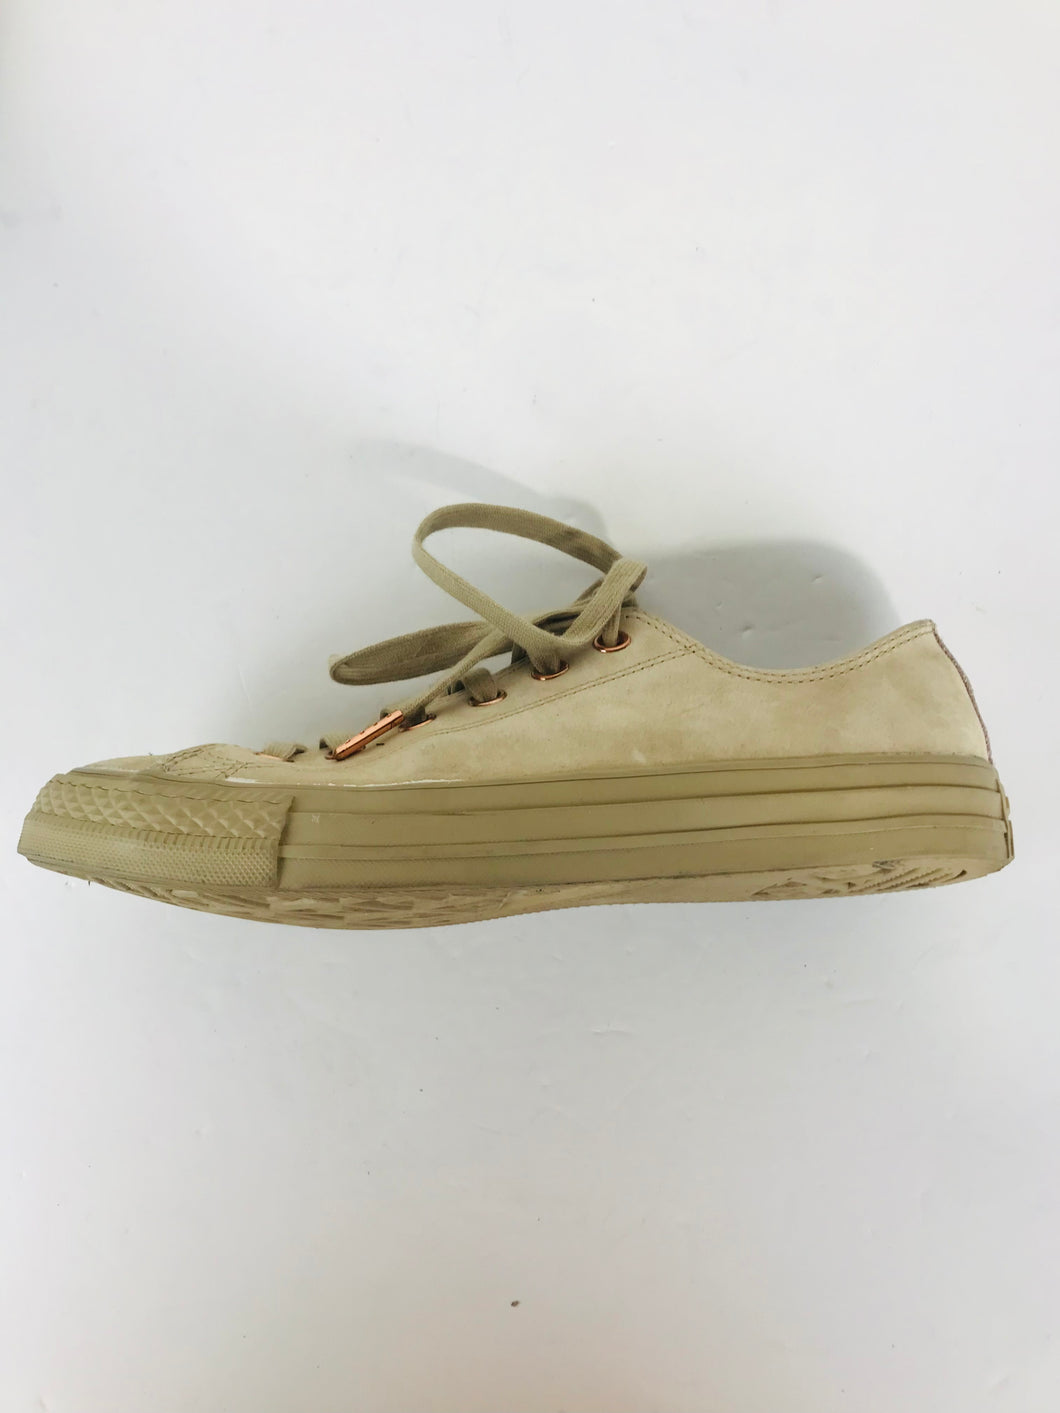 Converse All Star Women's Suede Trainers | UK7 | Beige